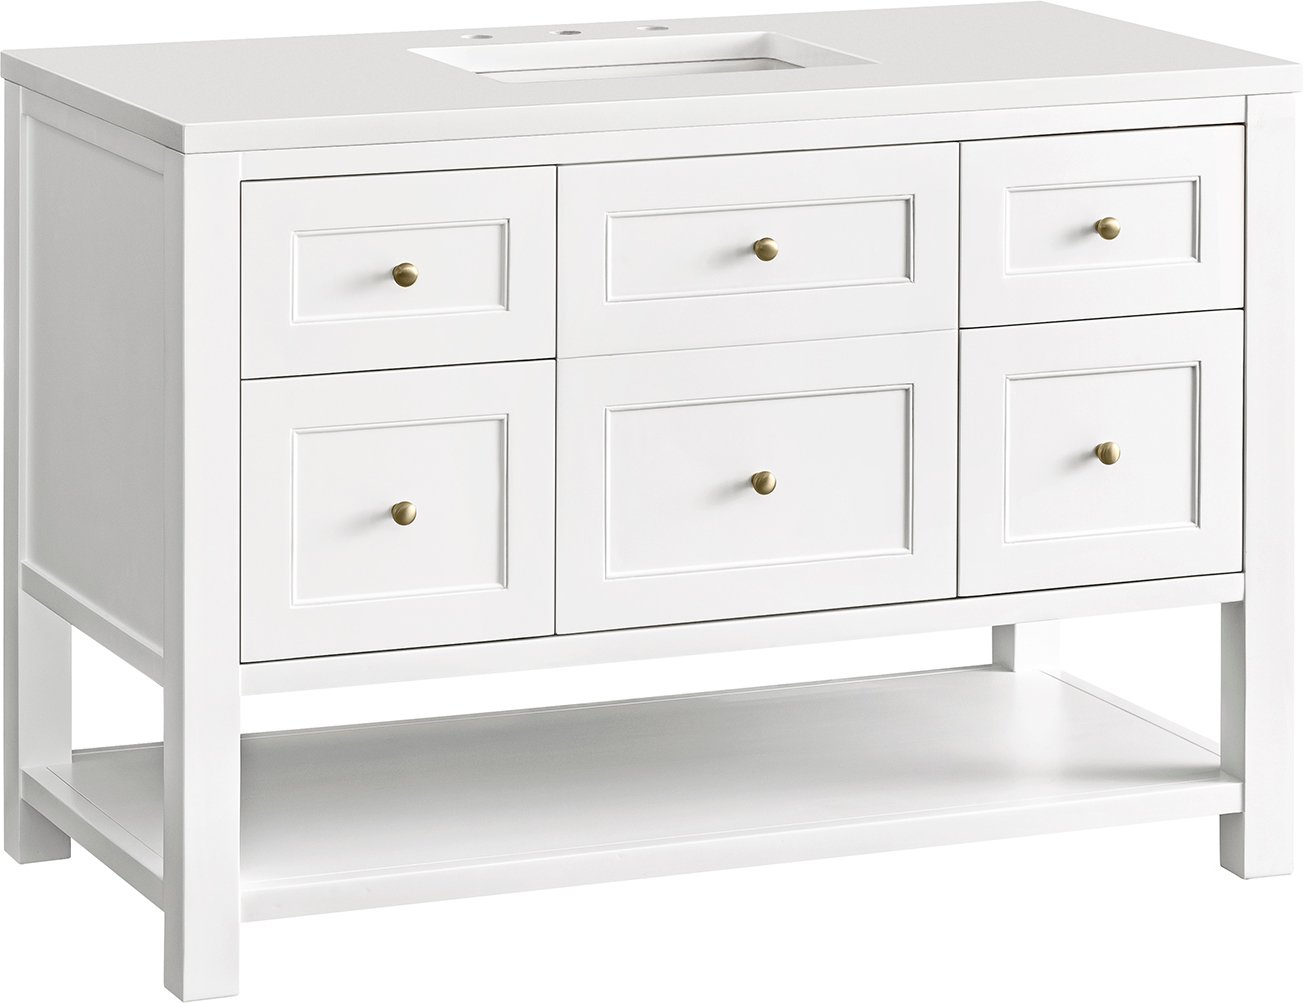 rustic double vanity James Martin Vanity Bright White Modern Farmhouse, Transitional